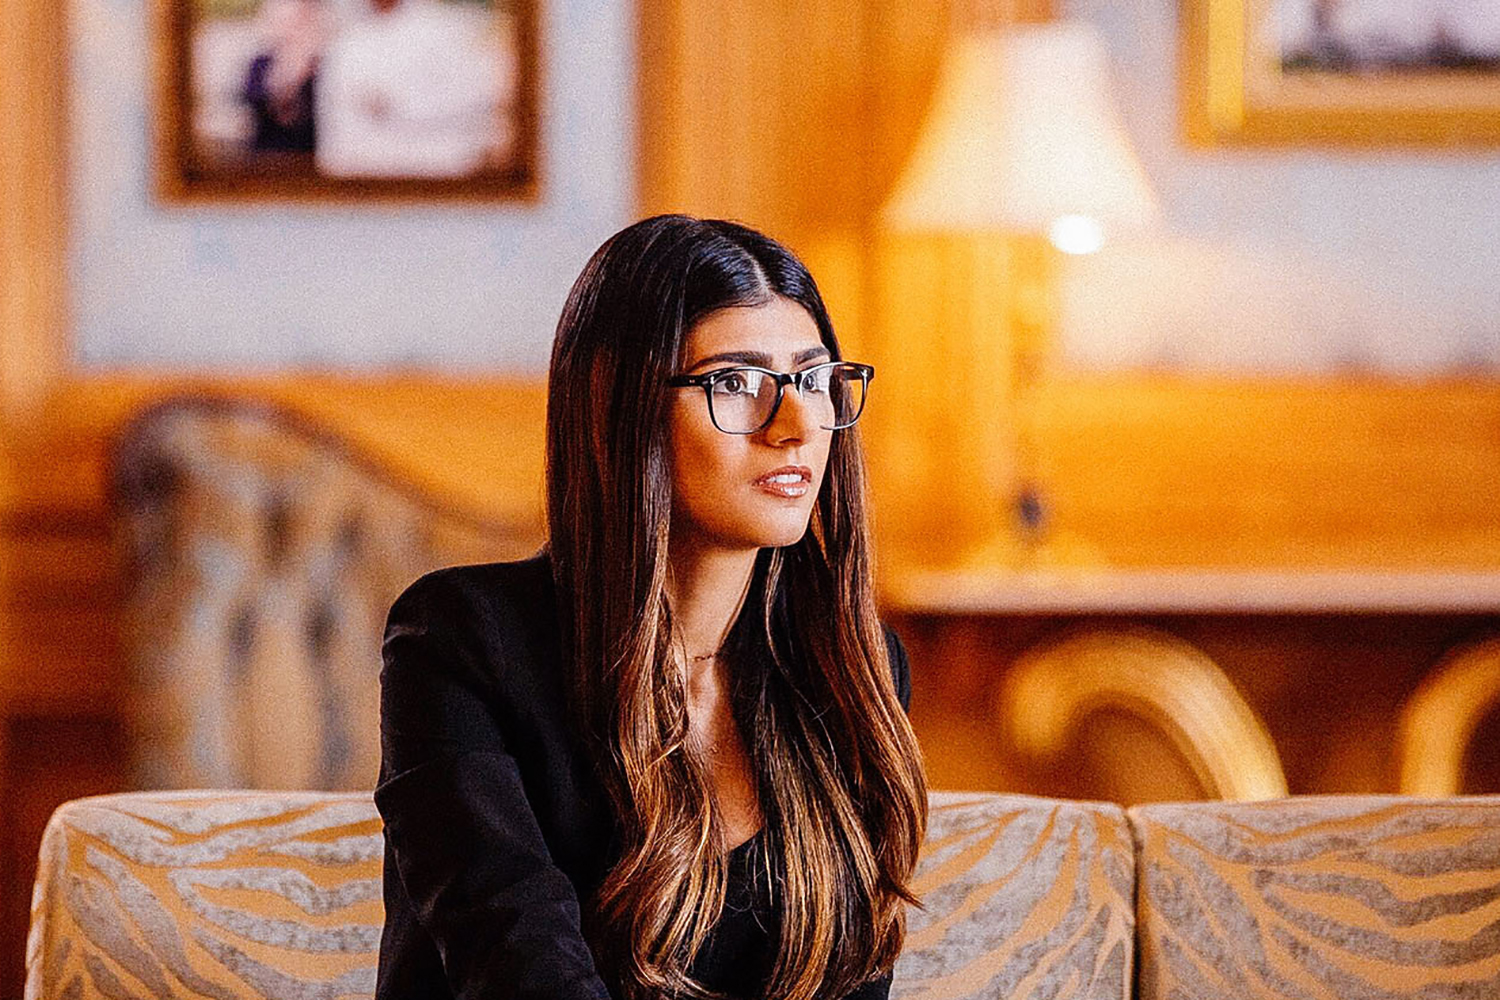 1500px x 1000px - Mia Khalifa, OnlyFans and the Politics of Ethical Porn - InsideHook